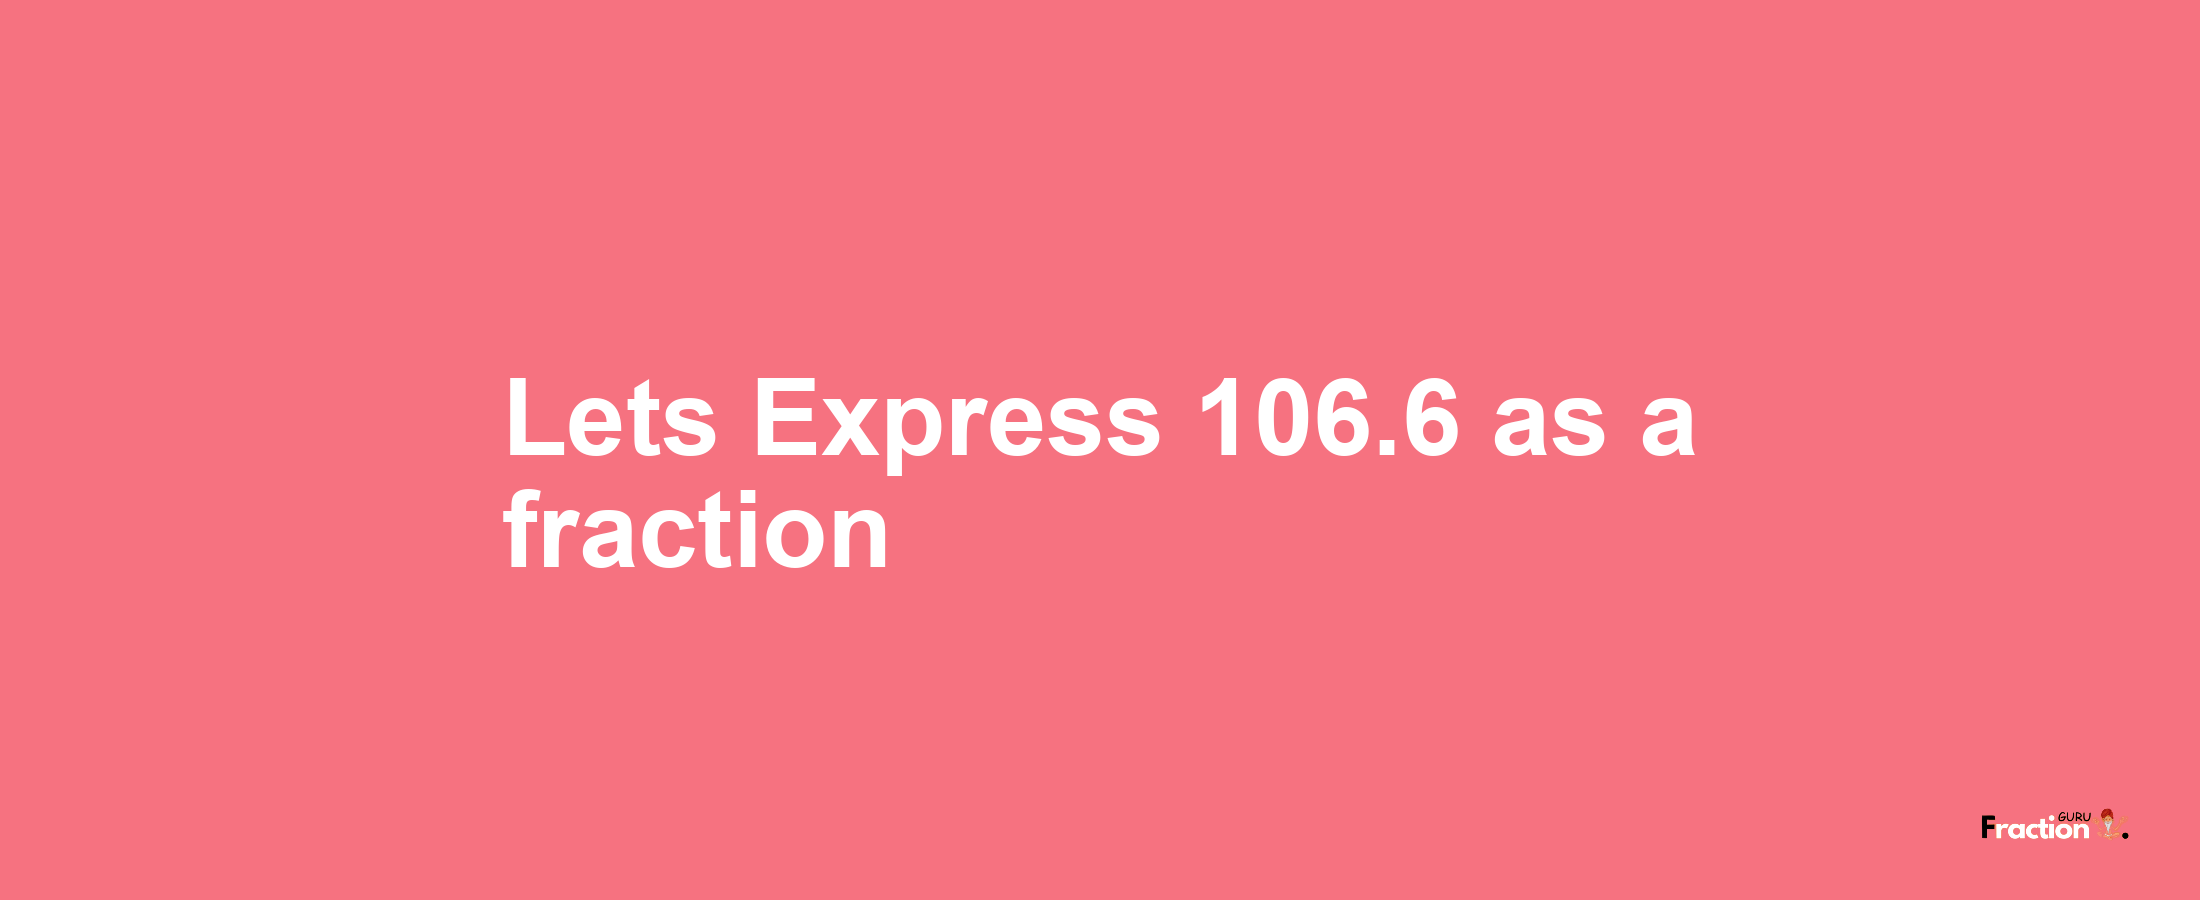 Lets Express 106.6 as afraction